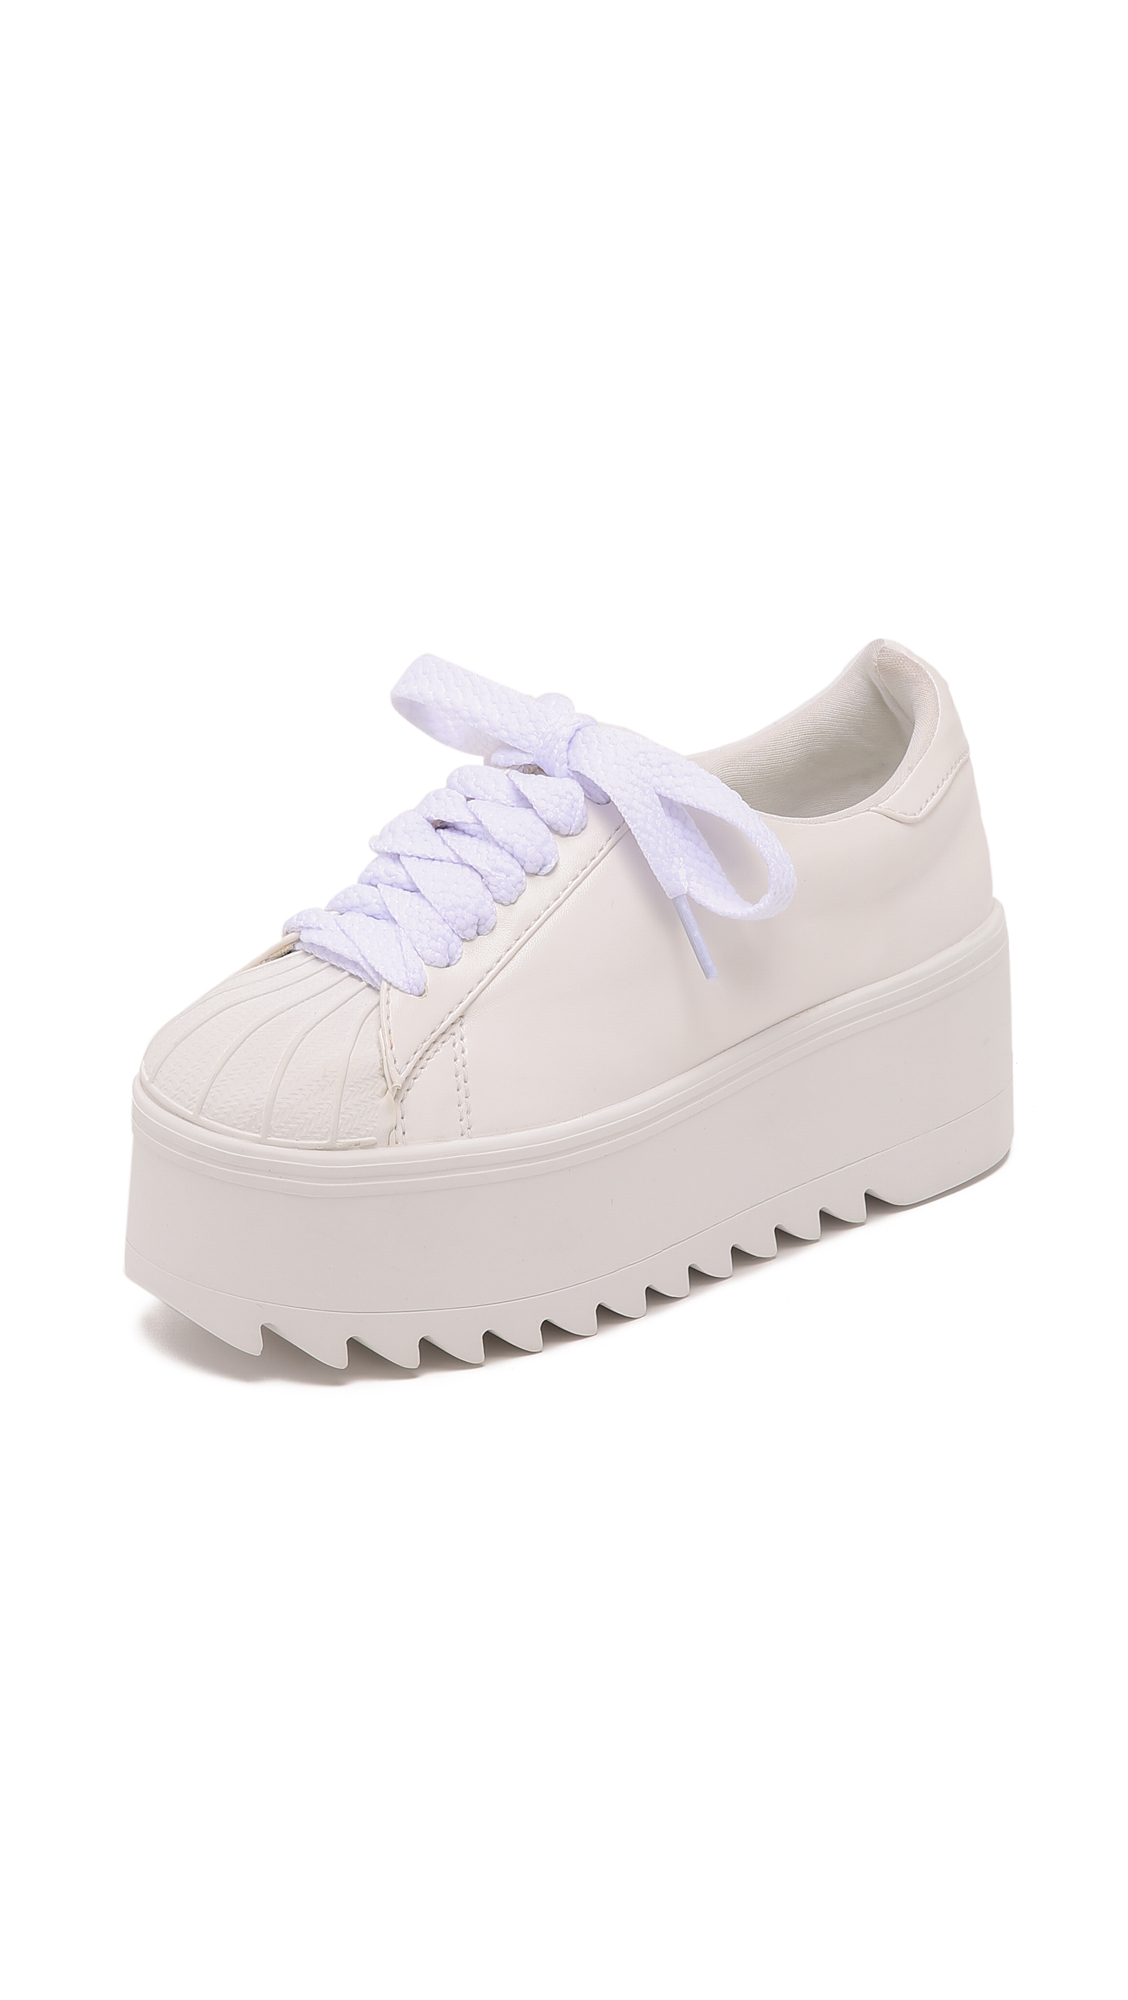 Jeffrey Campbell Synergy Platform Sneakers in White - Lyst